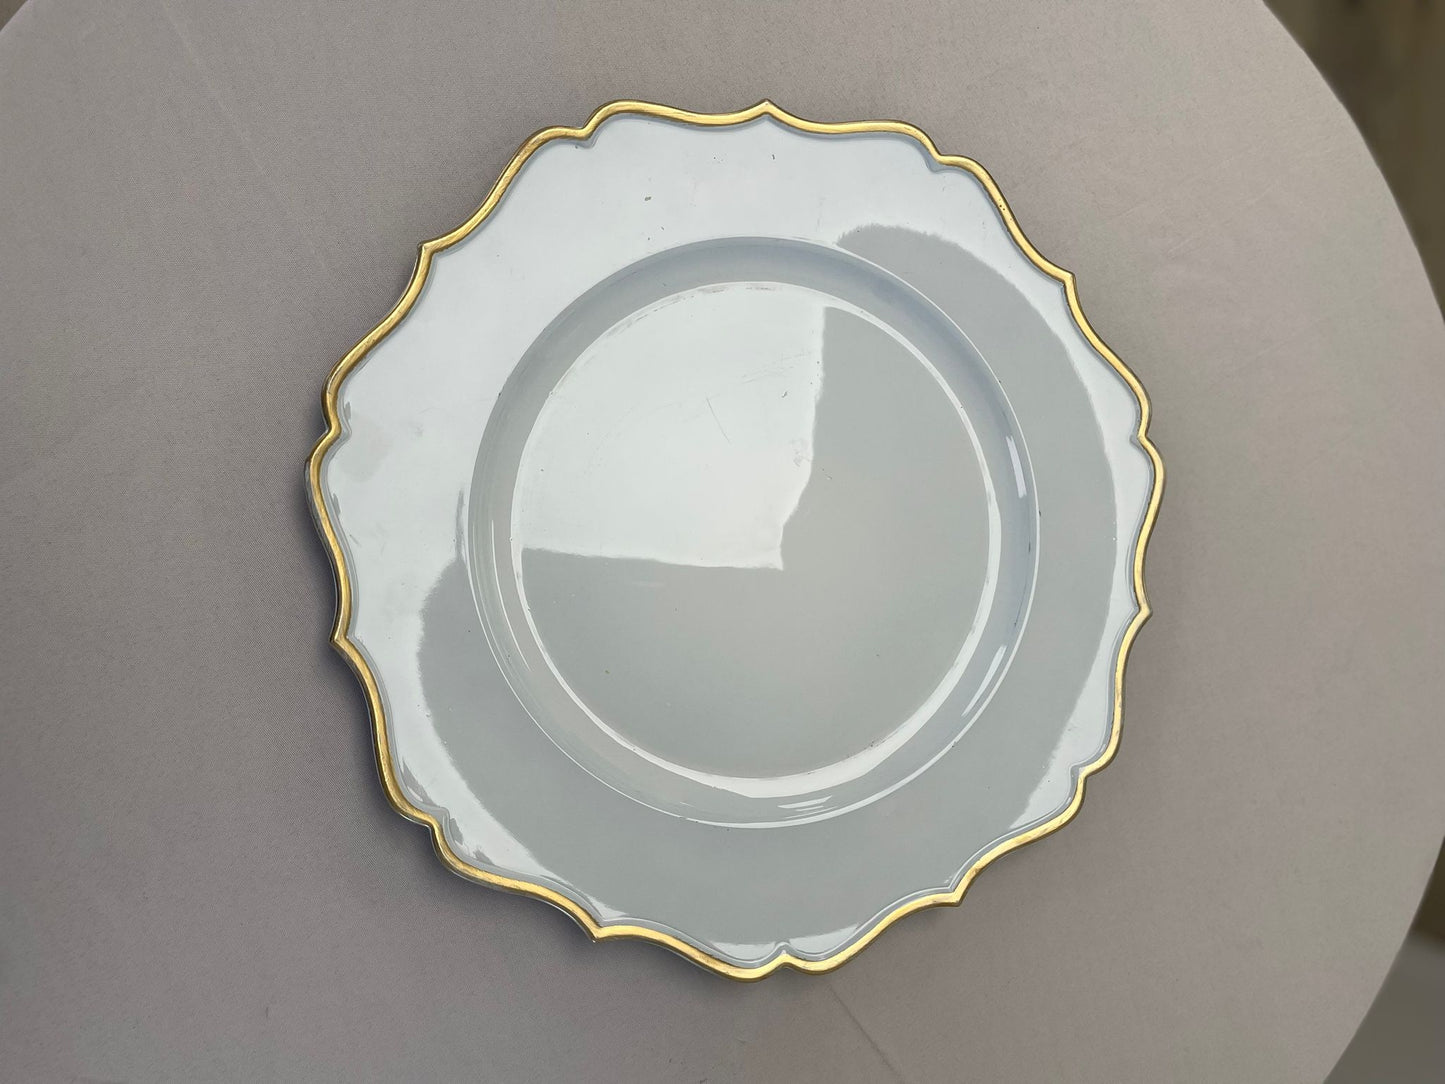 WHITE & GOLD SWIRL CHARGER PLATES